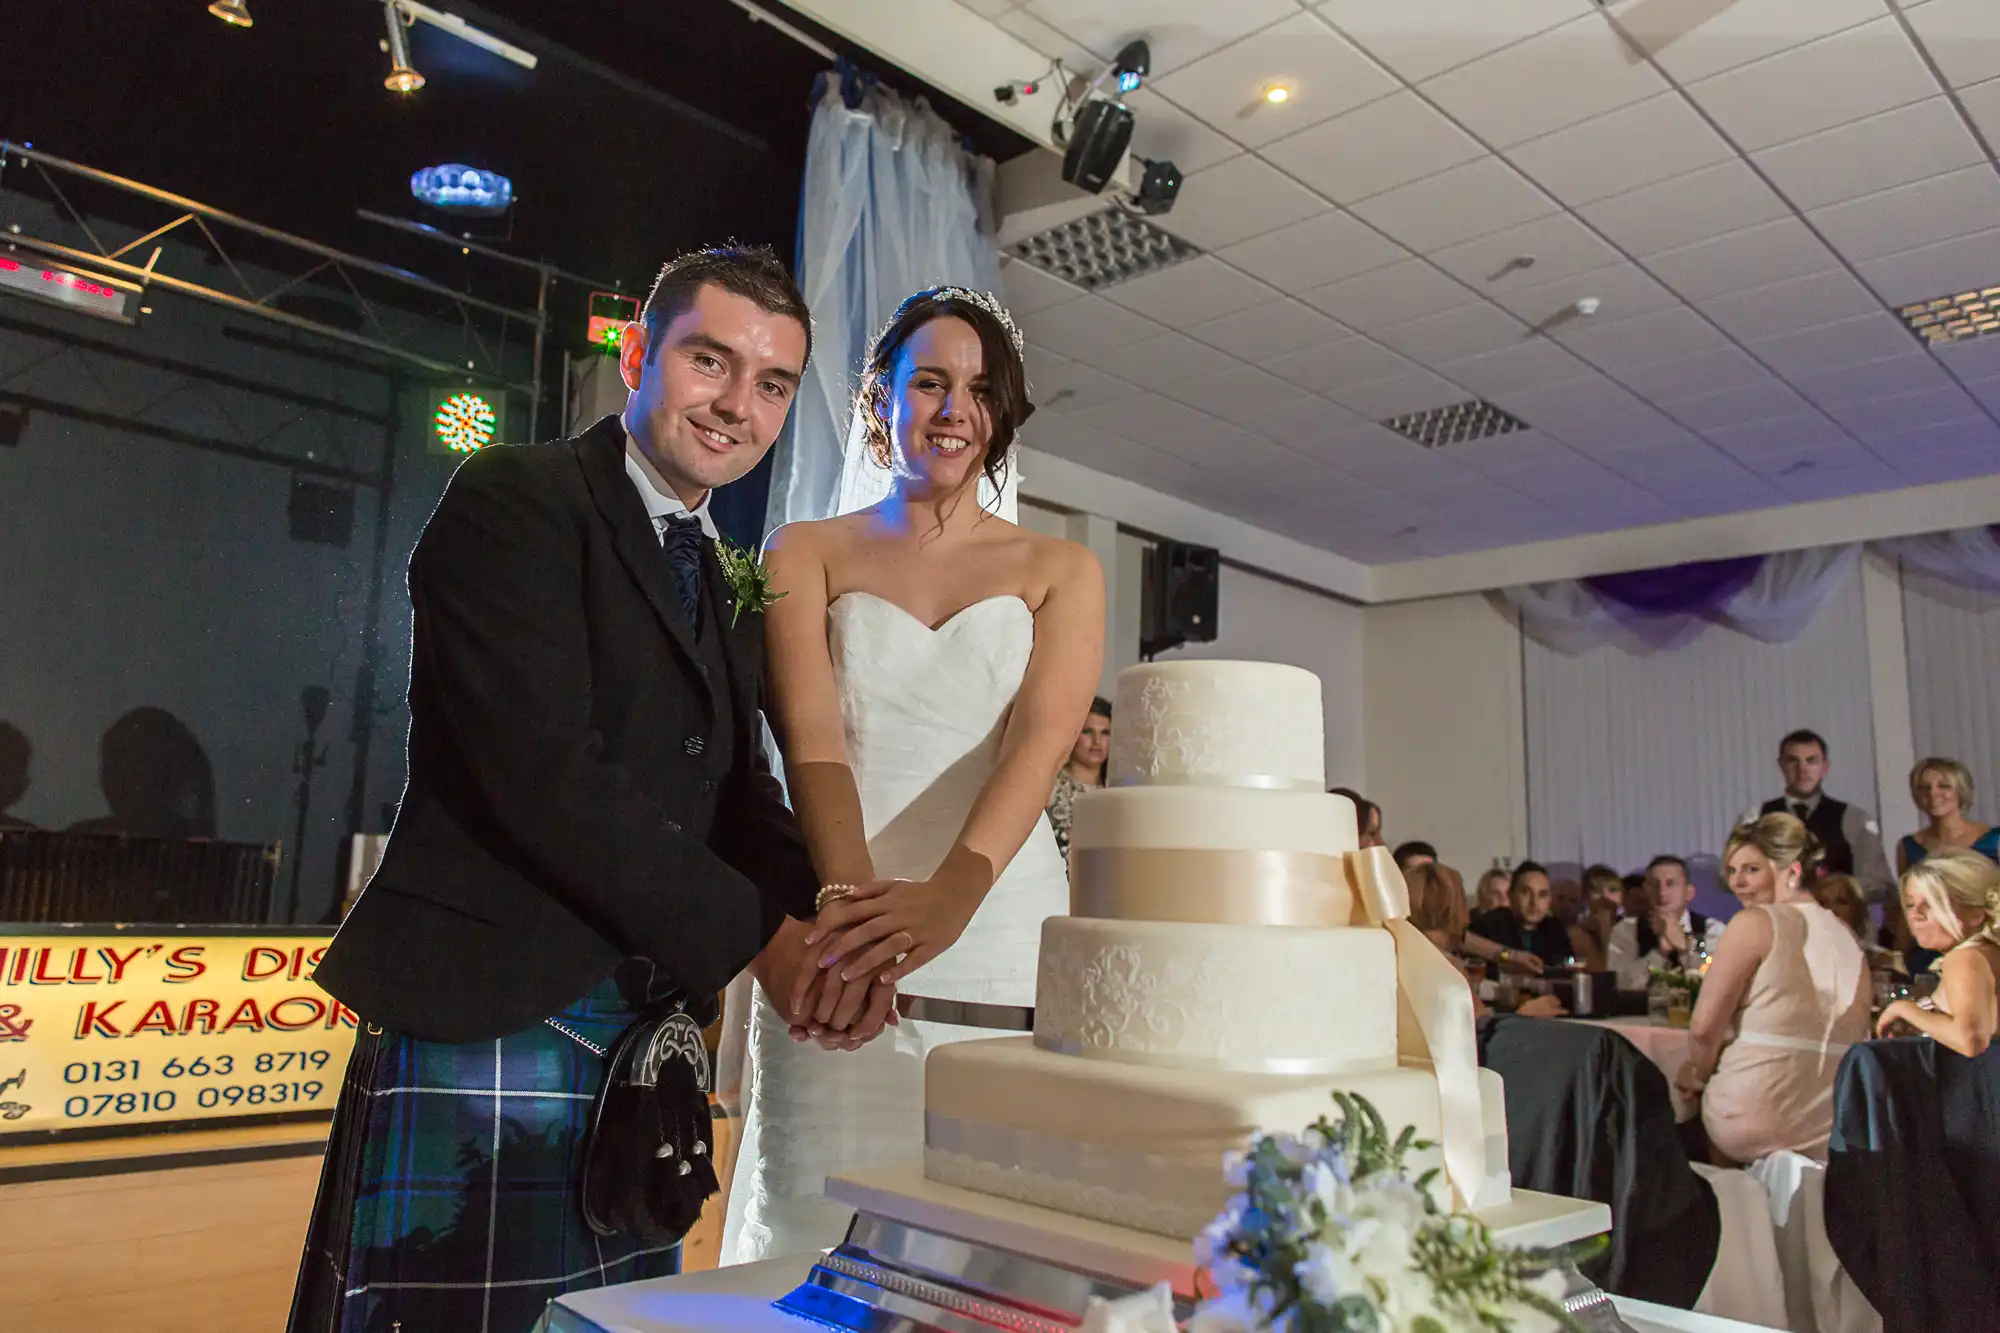 A bride and groom smiling at their wedding reception, standing behind a large tiered cake, with guests and a dj booth in the background.